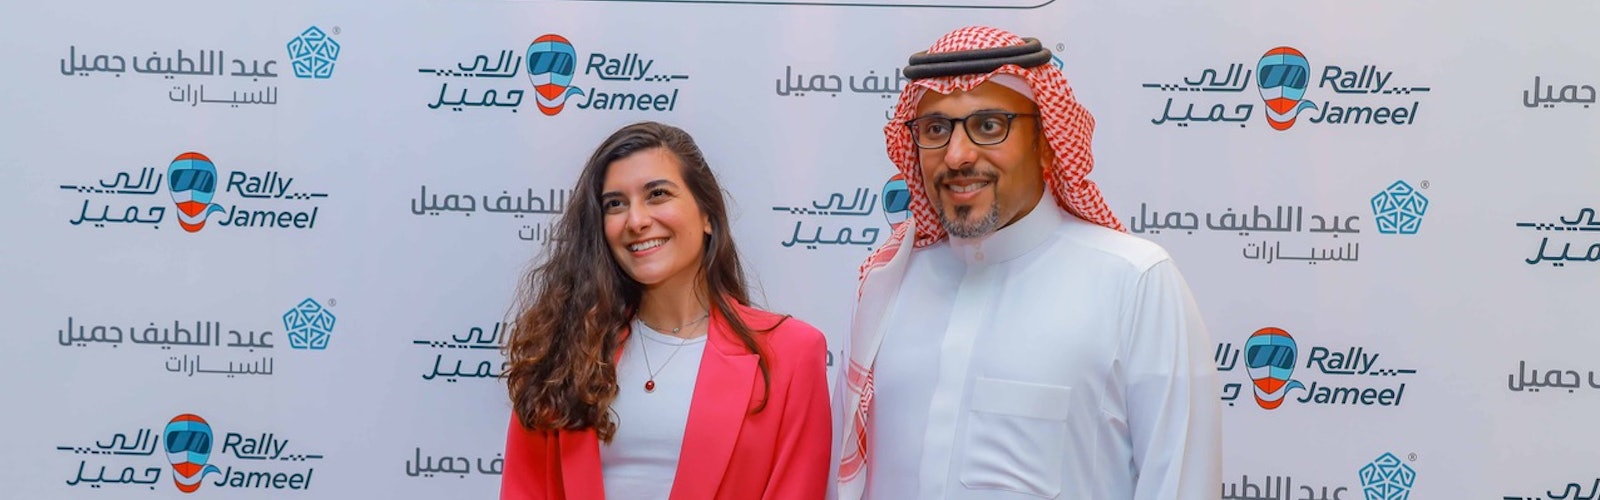 HRH Prince Khalid bin Sultan Al-Faisal, President of ther SAMF, and Samar Rahbini , who is interested in participating.